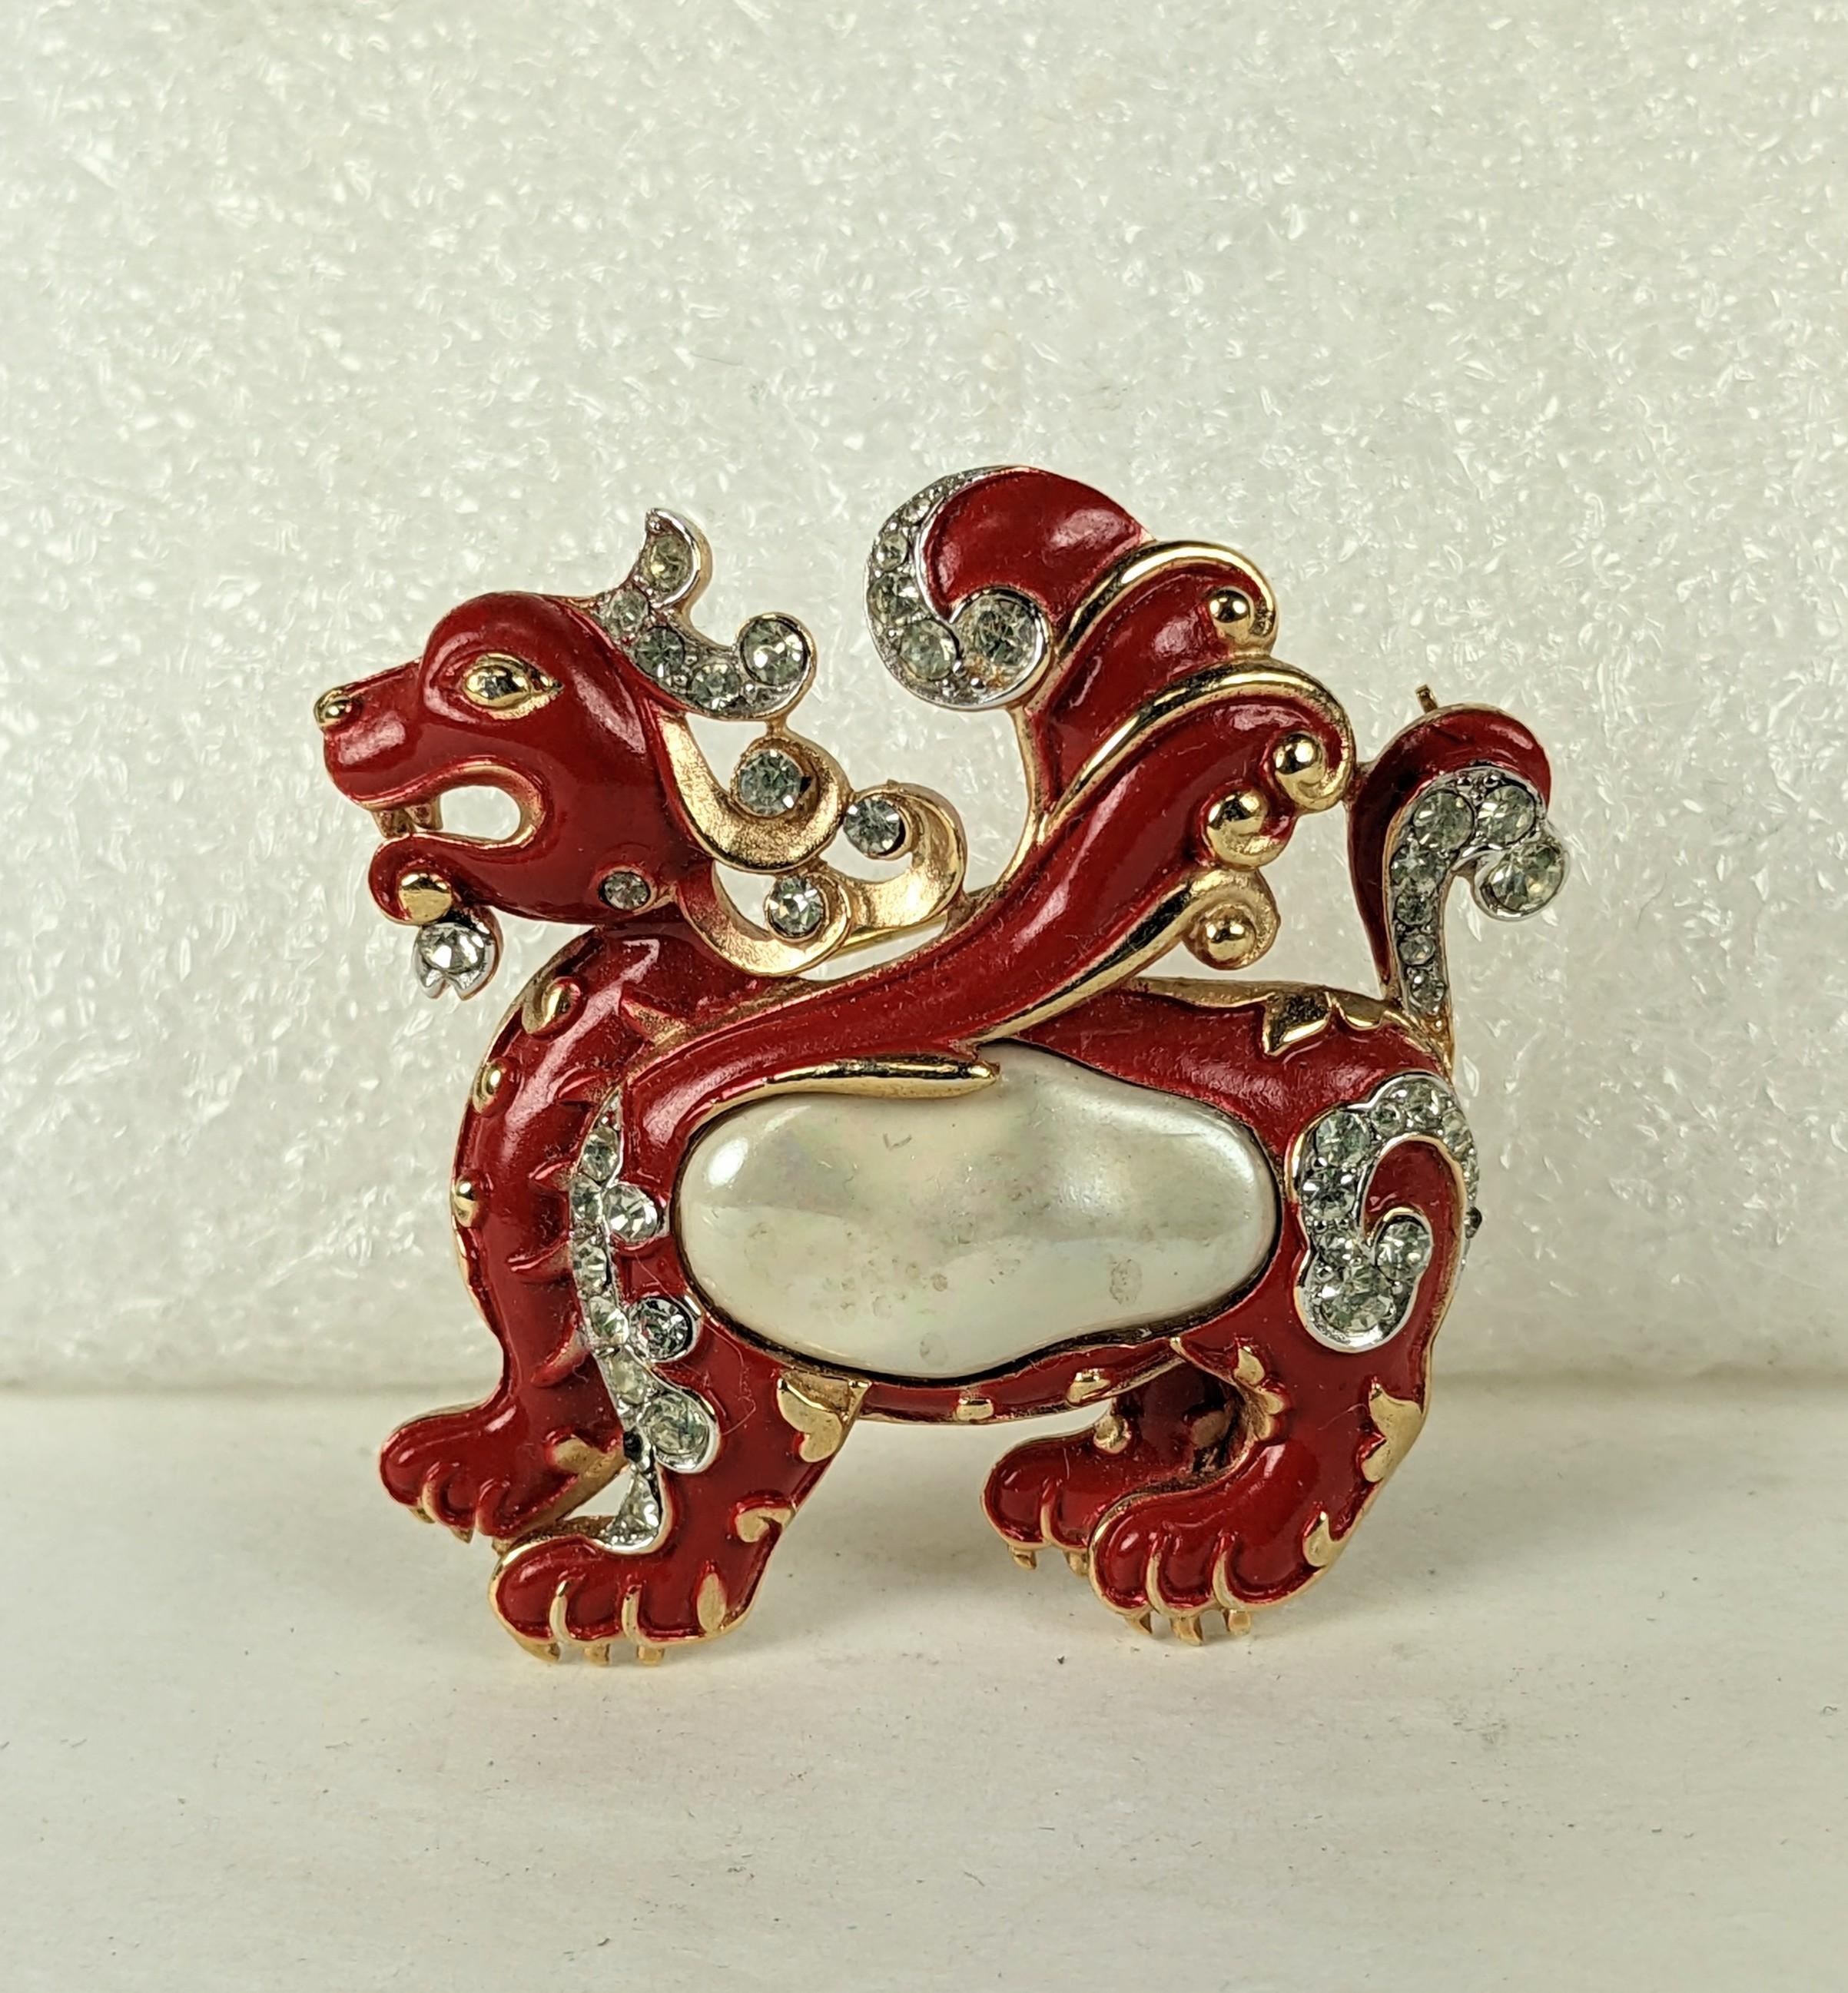 Rare Series Trifari Ming Dragon Pearl Belly by Alfred Phillipe from the 1960's. Red enamel over gold with pave studded 